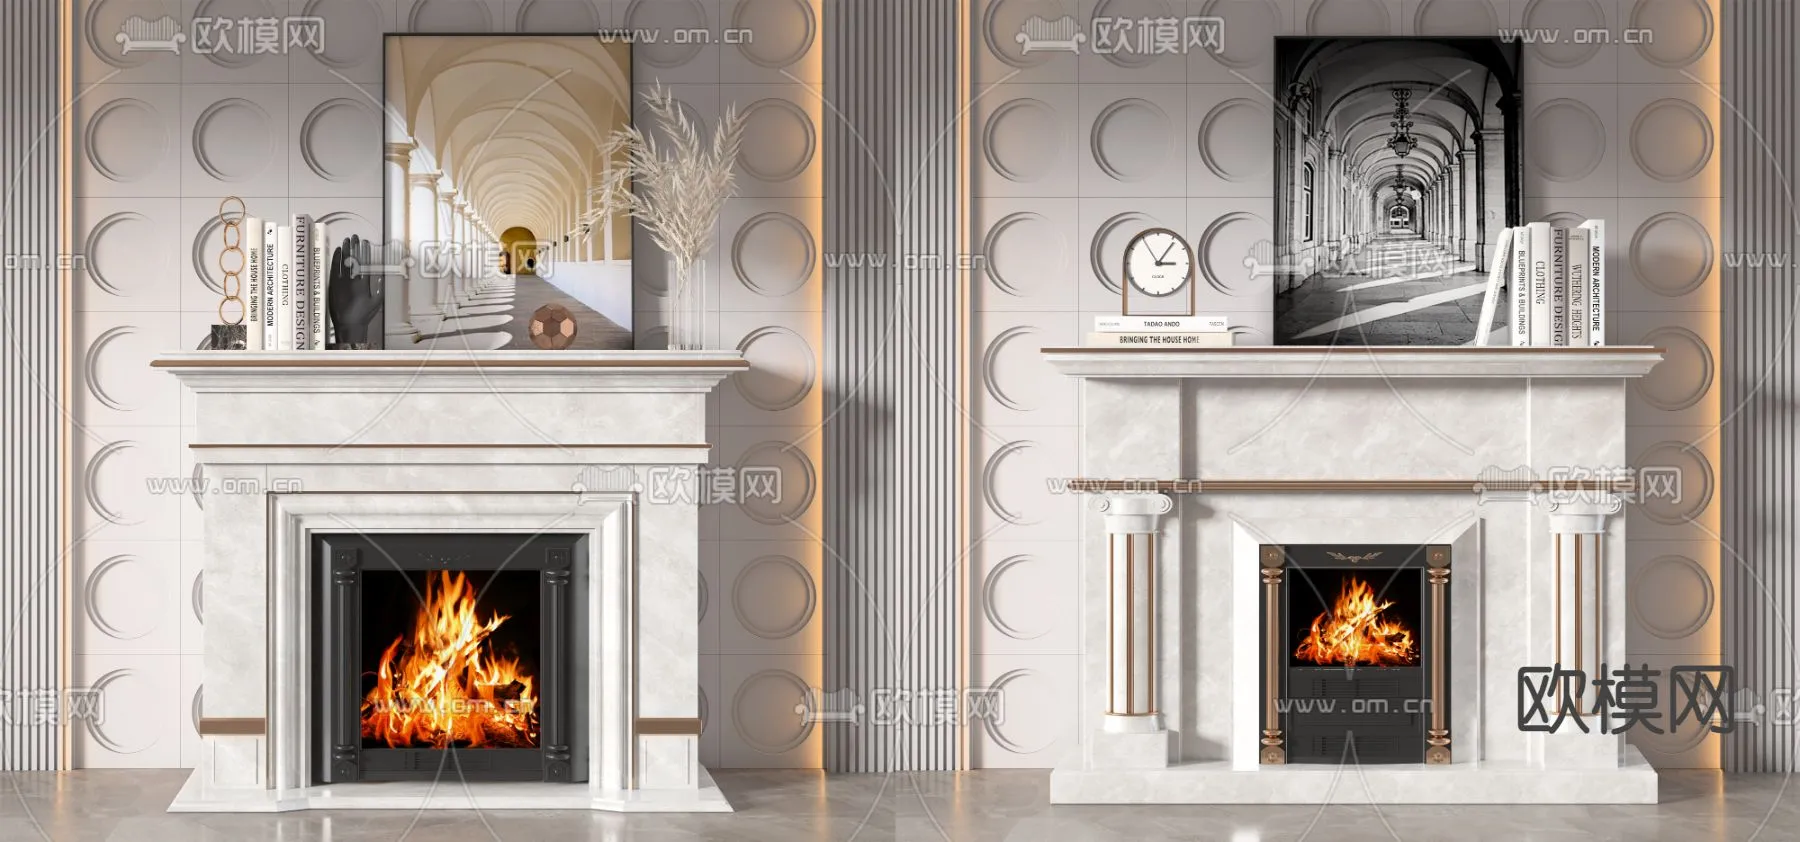 CLASSIC – FIREPLACE 3DMODELS – 073